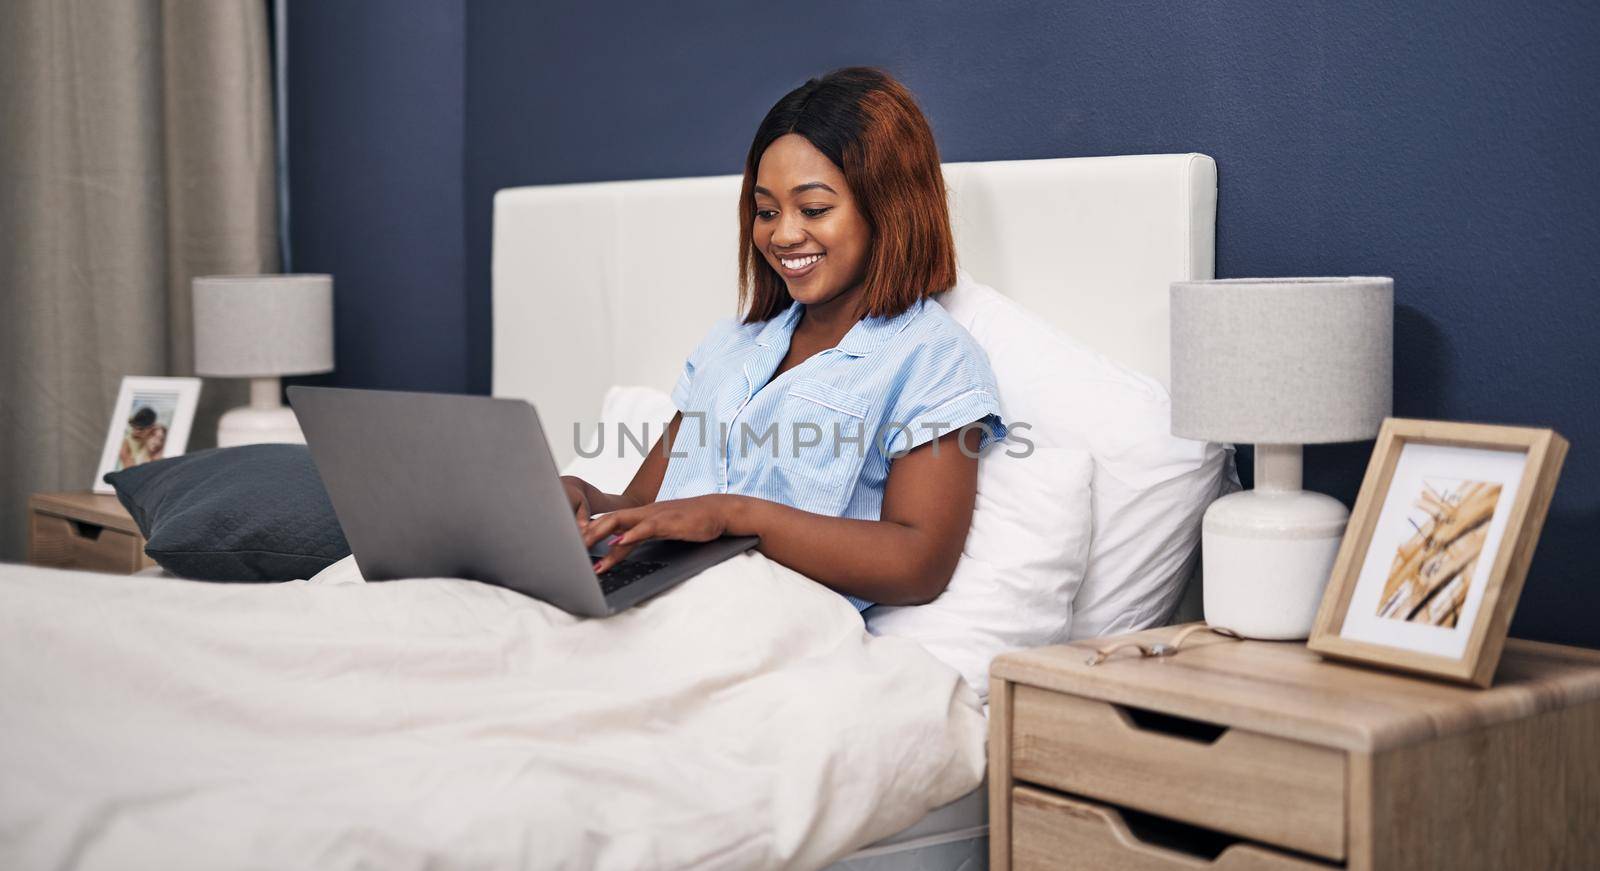 Cropped shot of an attractive young woman using her laptop while sitting in bed.